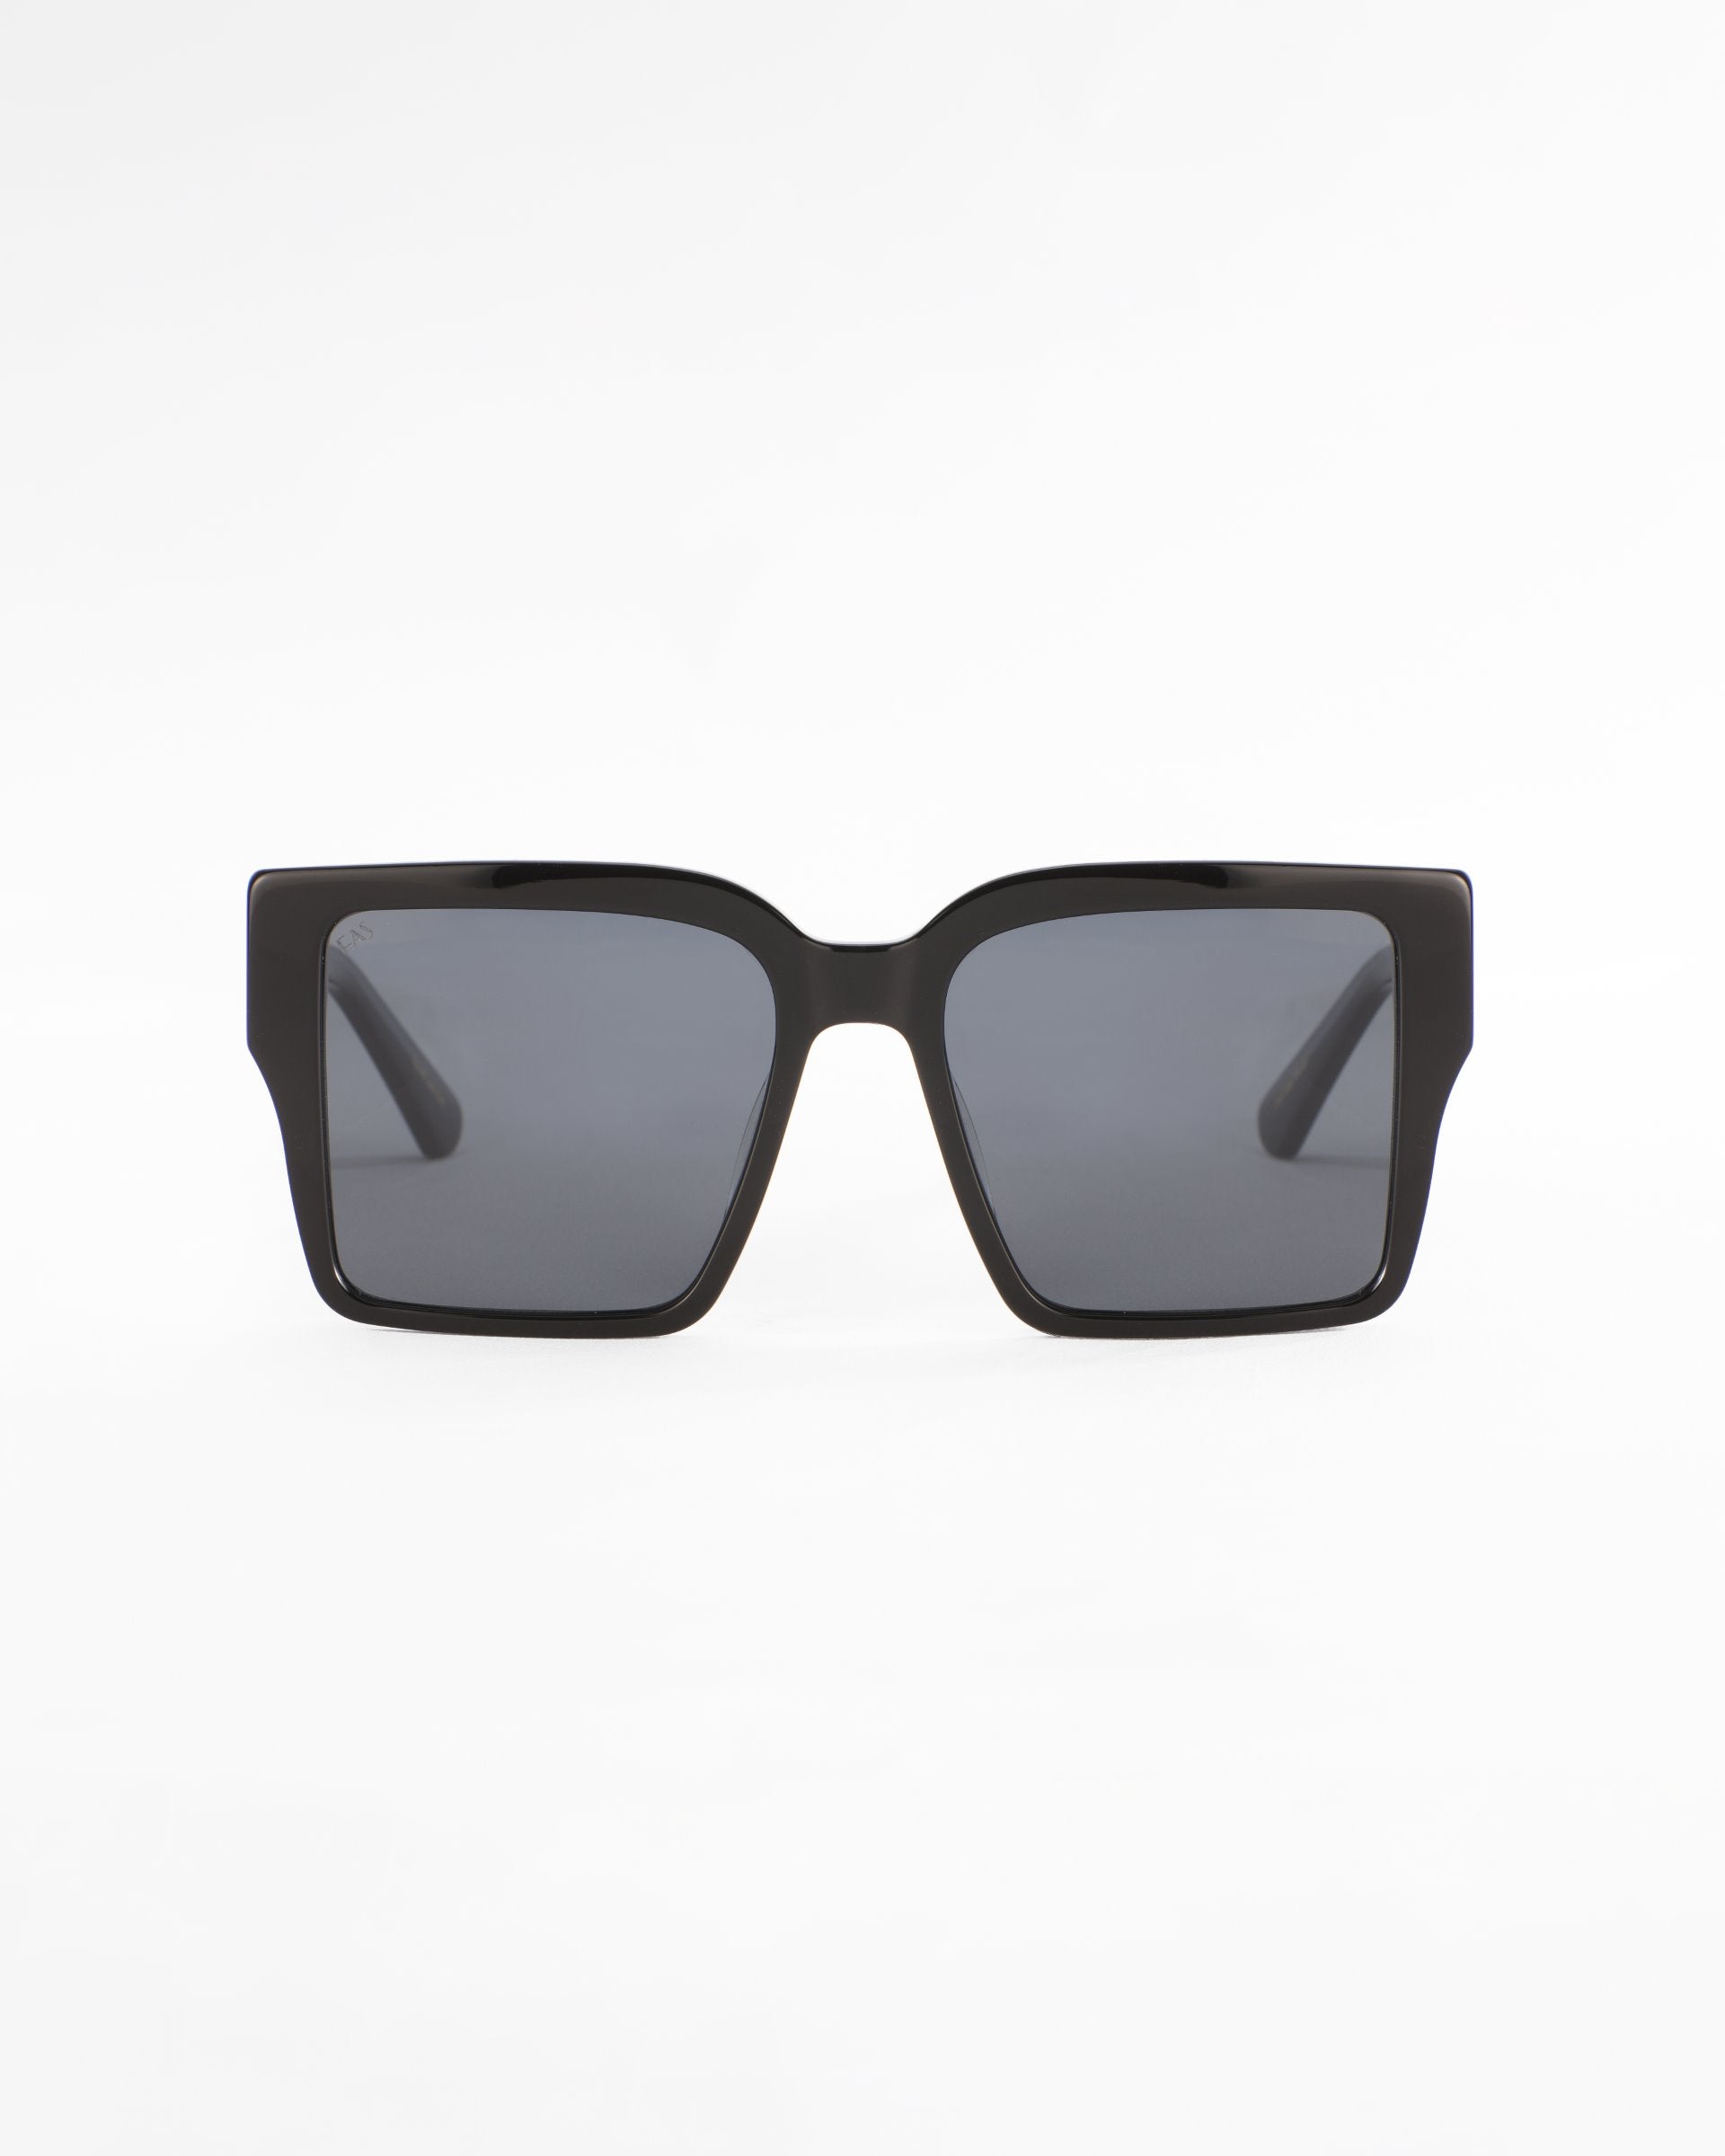 A pair of black rectangular For Art's Sake® Castle sunglasses with ultra-lightweight lenses is centered against a plain white background. The frames have a simple, modern design with slightly rounded edges.